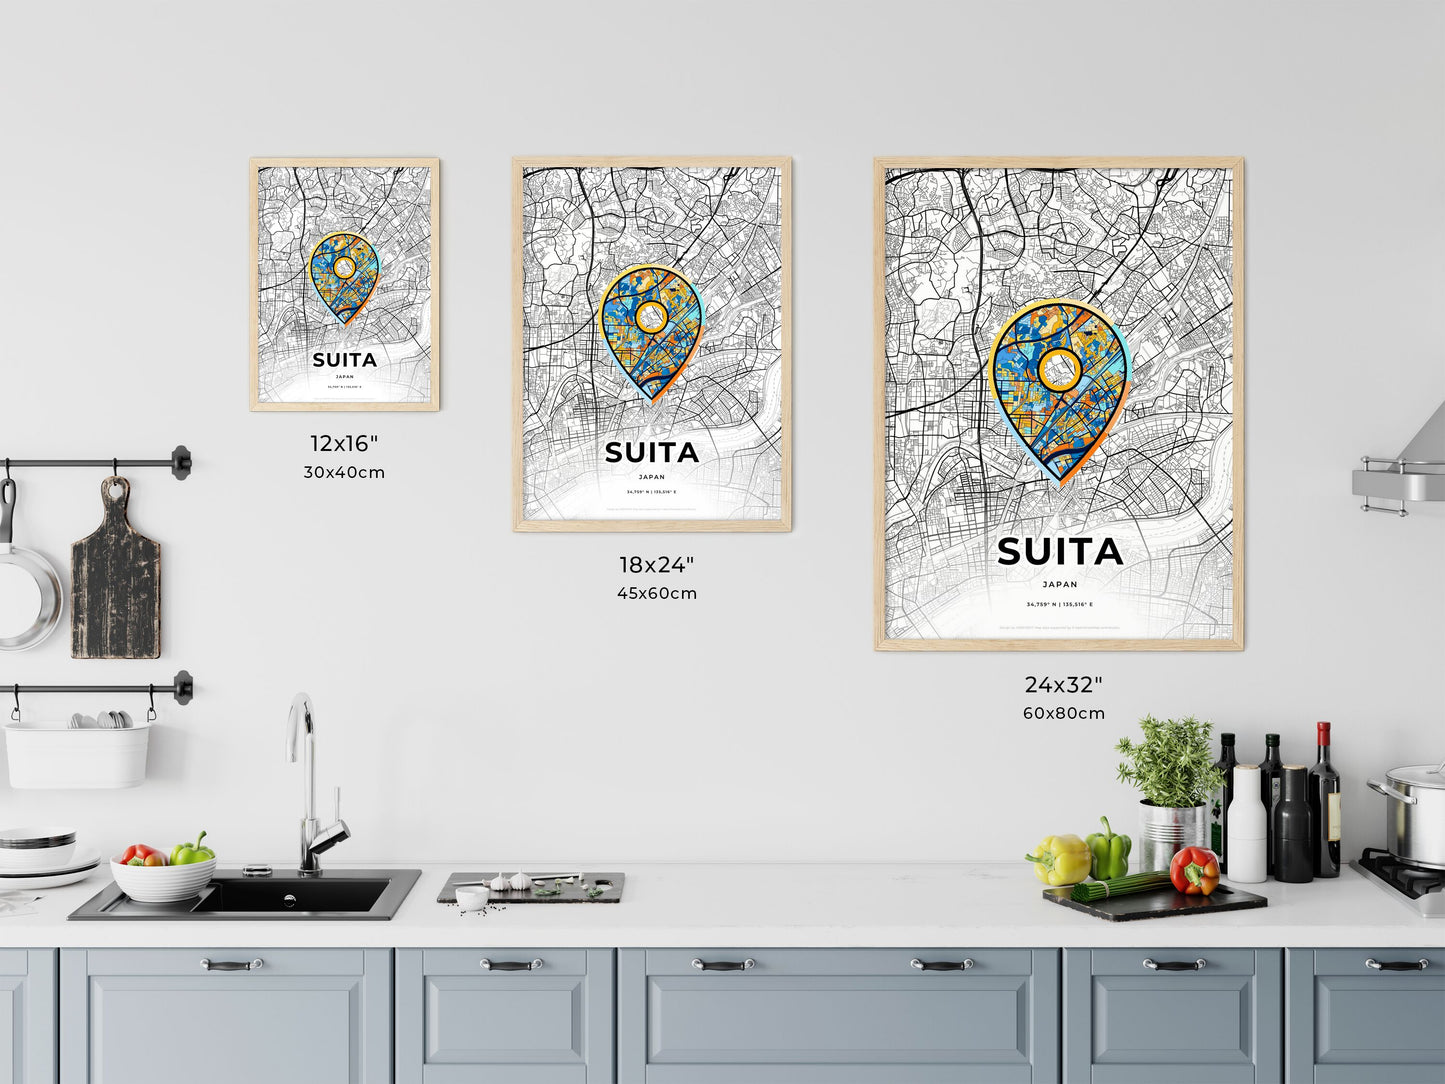 SUITA JAPAN minimal art map with a colorful icon. Where it all began, Couple map gift.